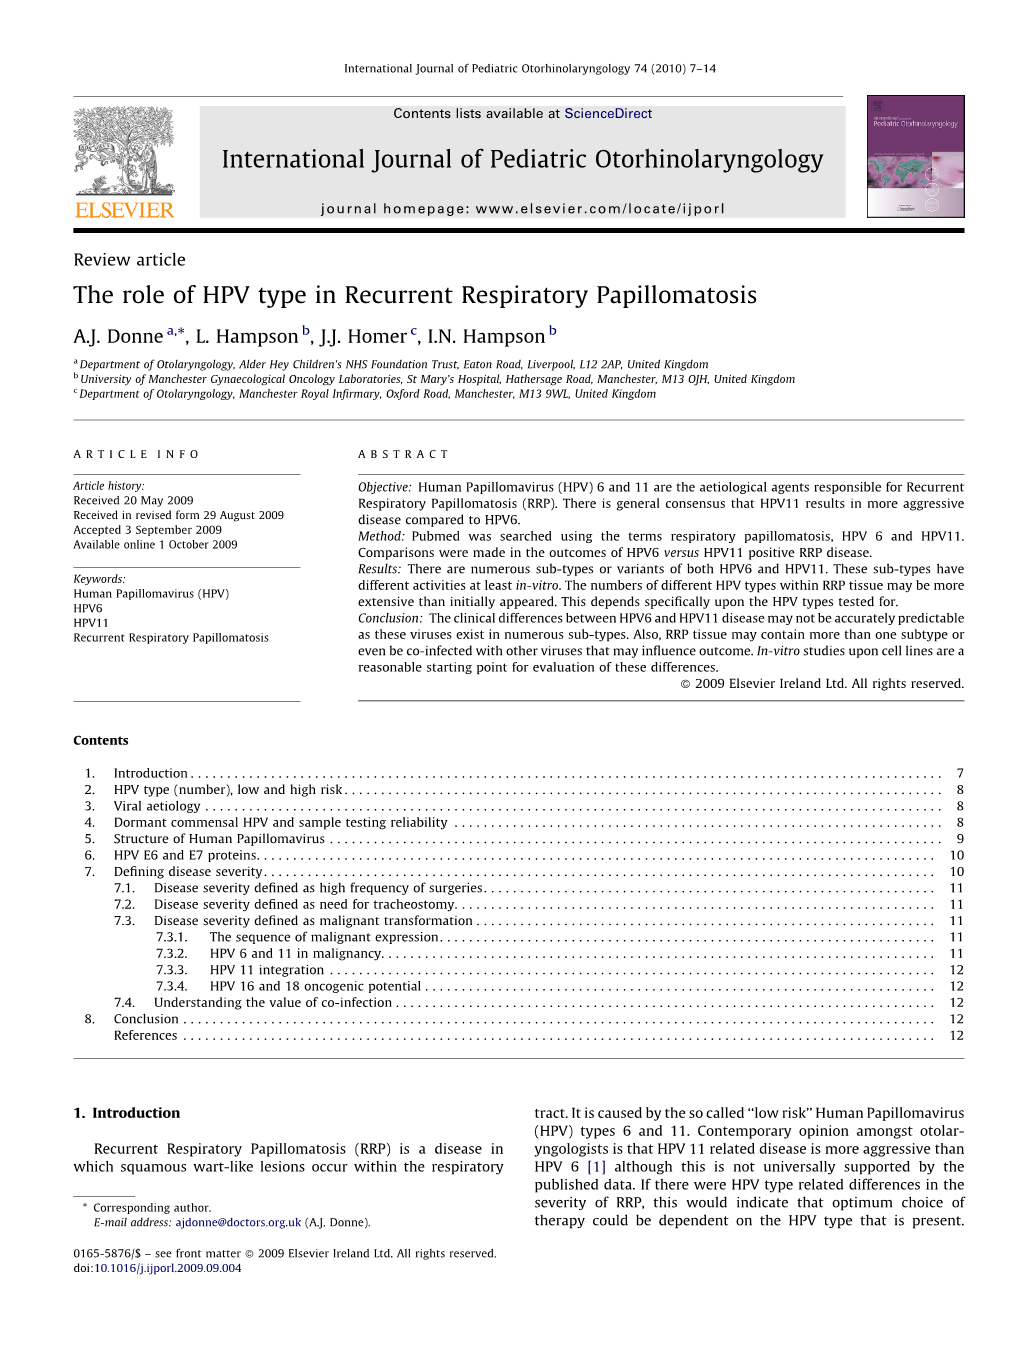 The Role of HPV Type in Recurrent Respiratory Papillomatosis.Pdf